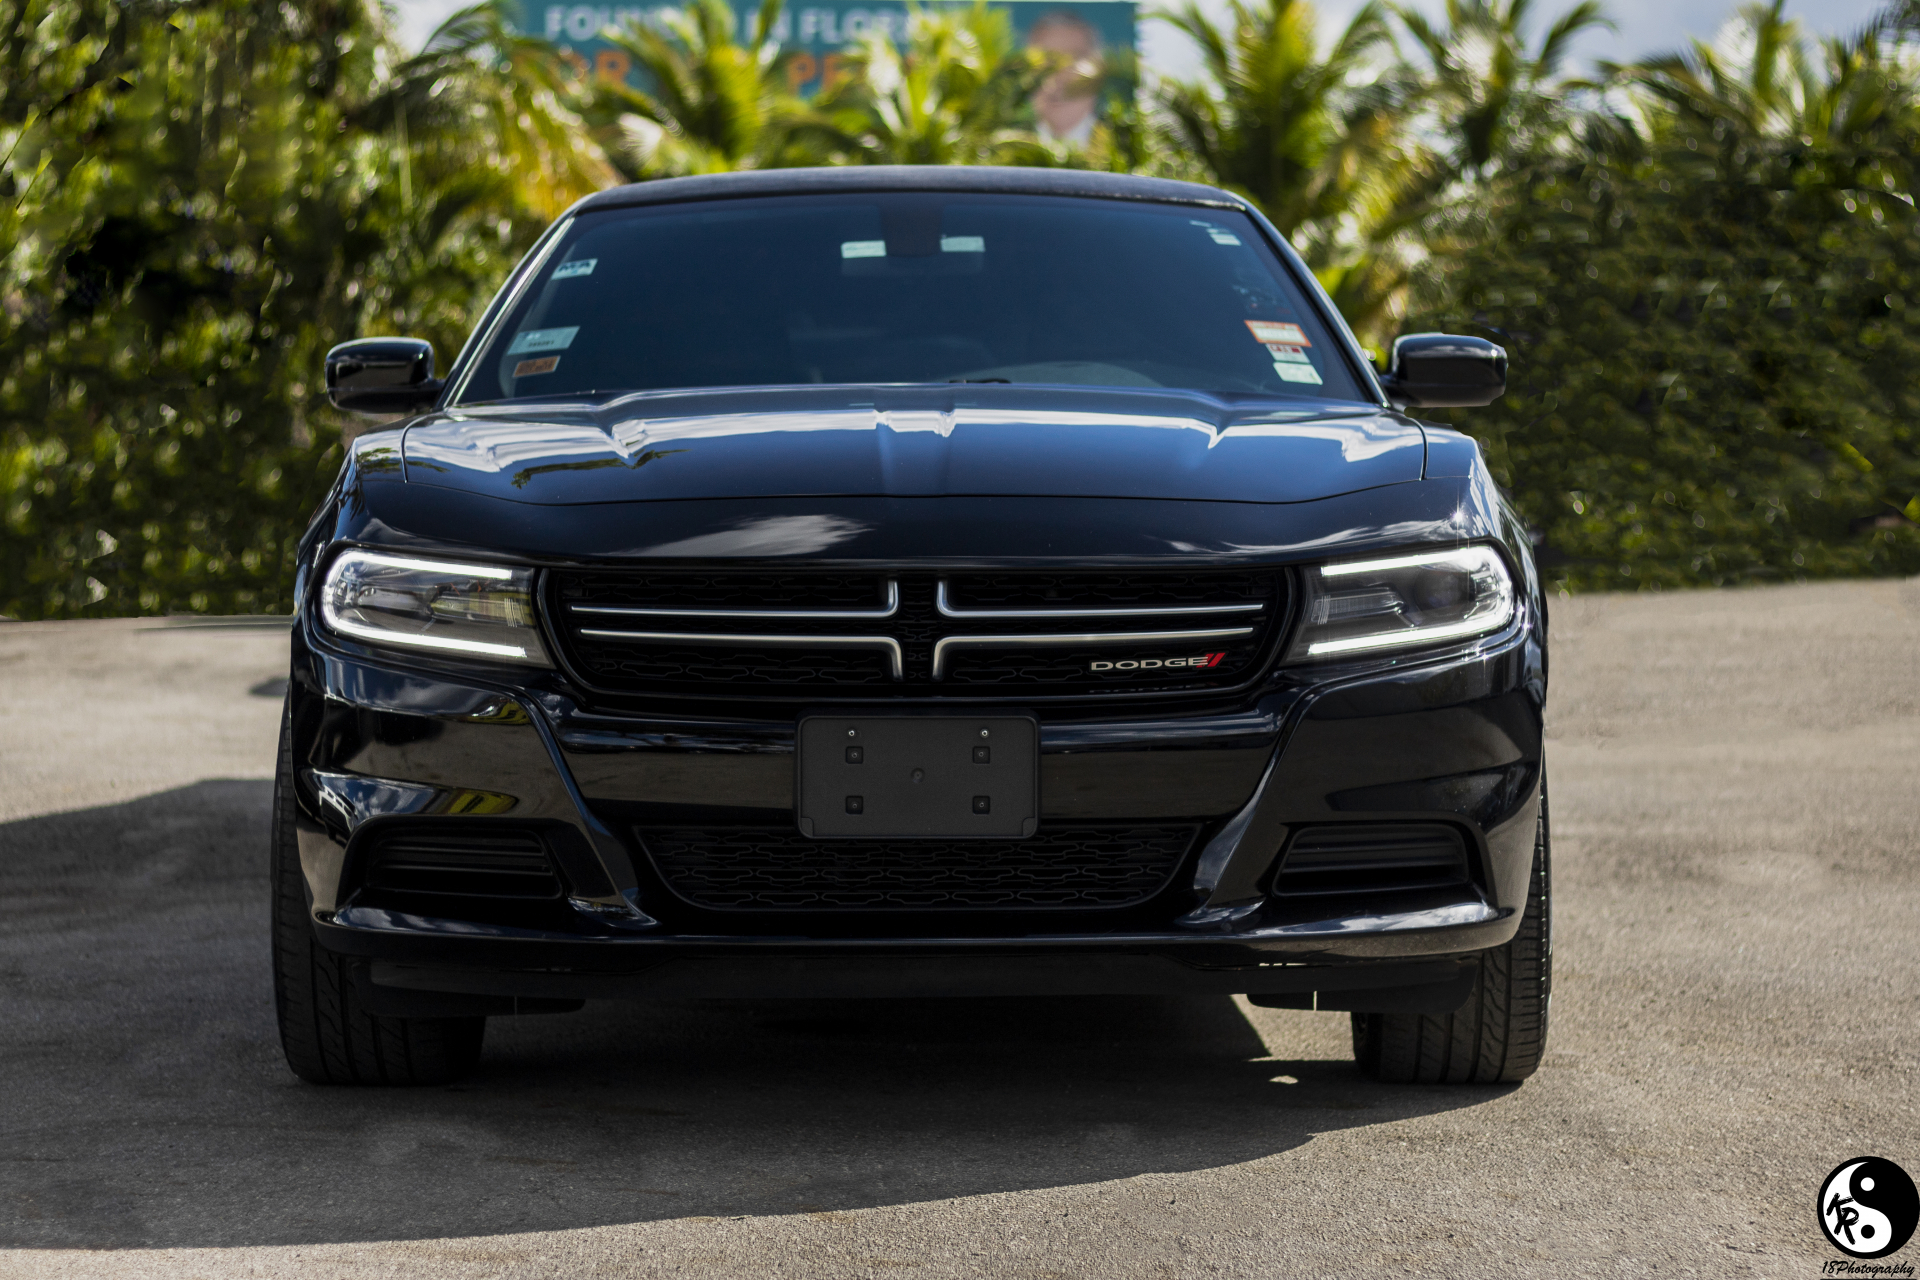 NEW 2016 Dodge Charger Black Panther
Limo /
Boca Raton, FL

 / Hourly $0.00
